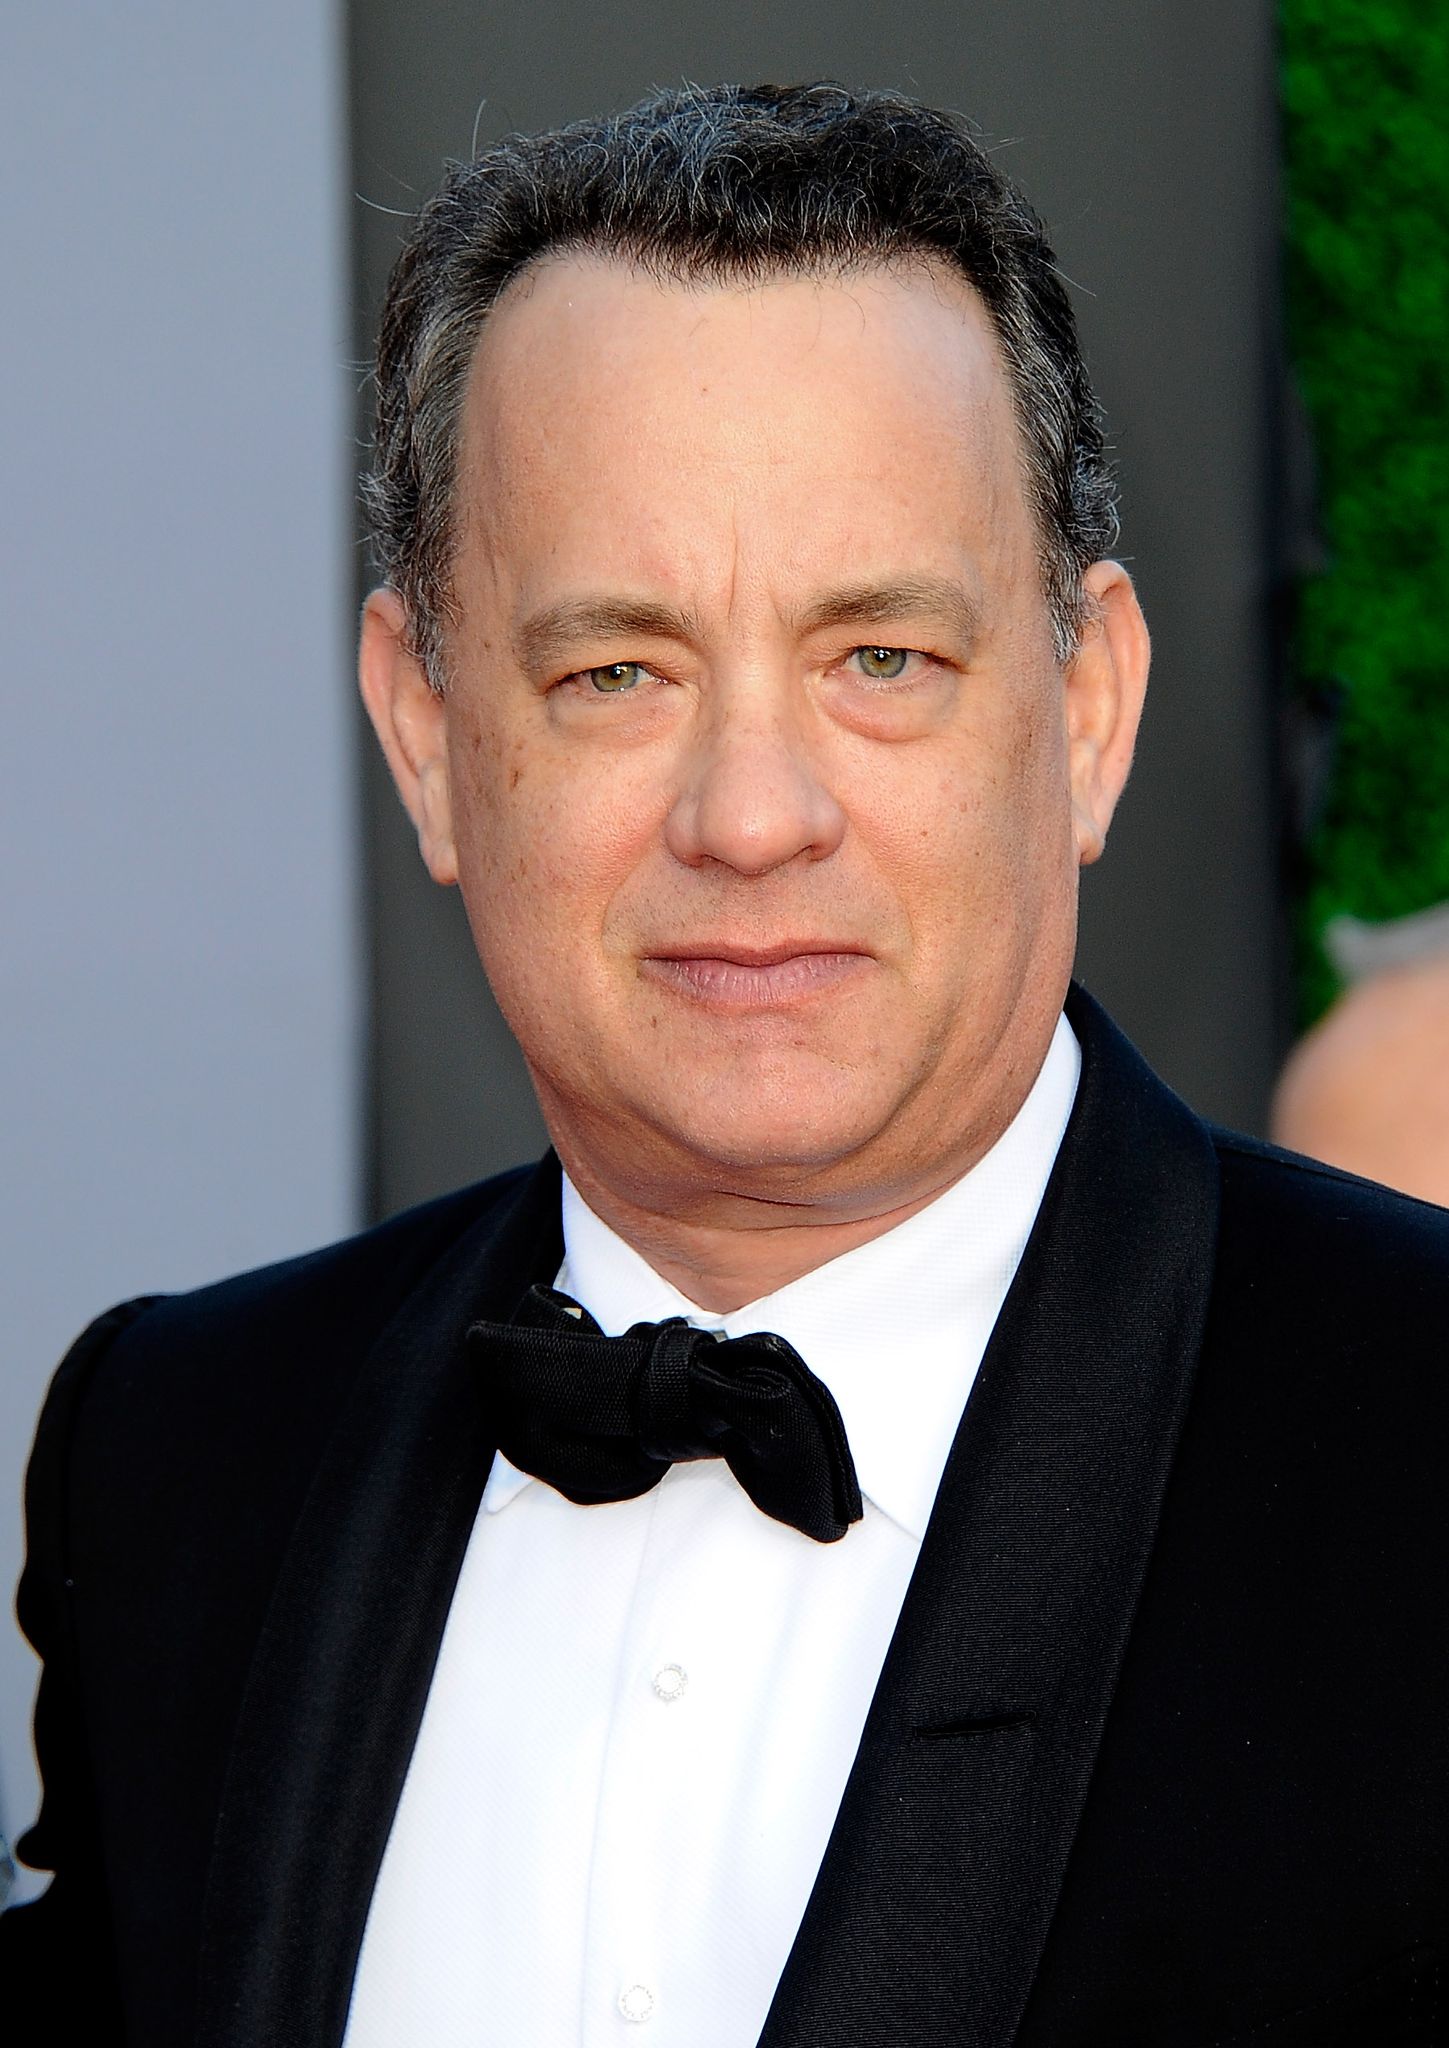 Tom Hanks at the BAFTA Brits To Watch event held at the Belasco Theatre on July 9, 2011 in Los Angeles, California.| Photo: Getty Images